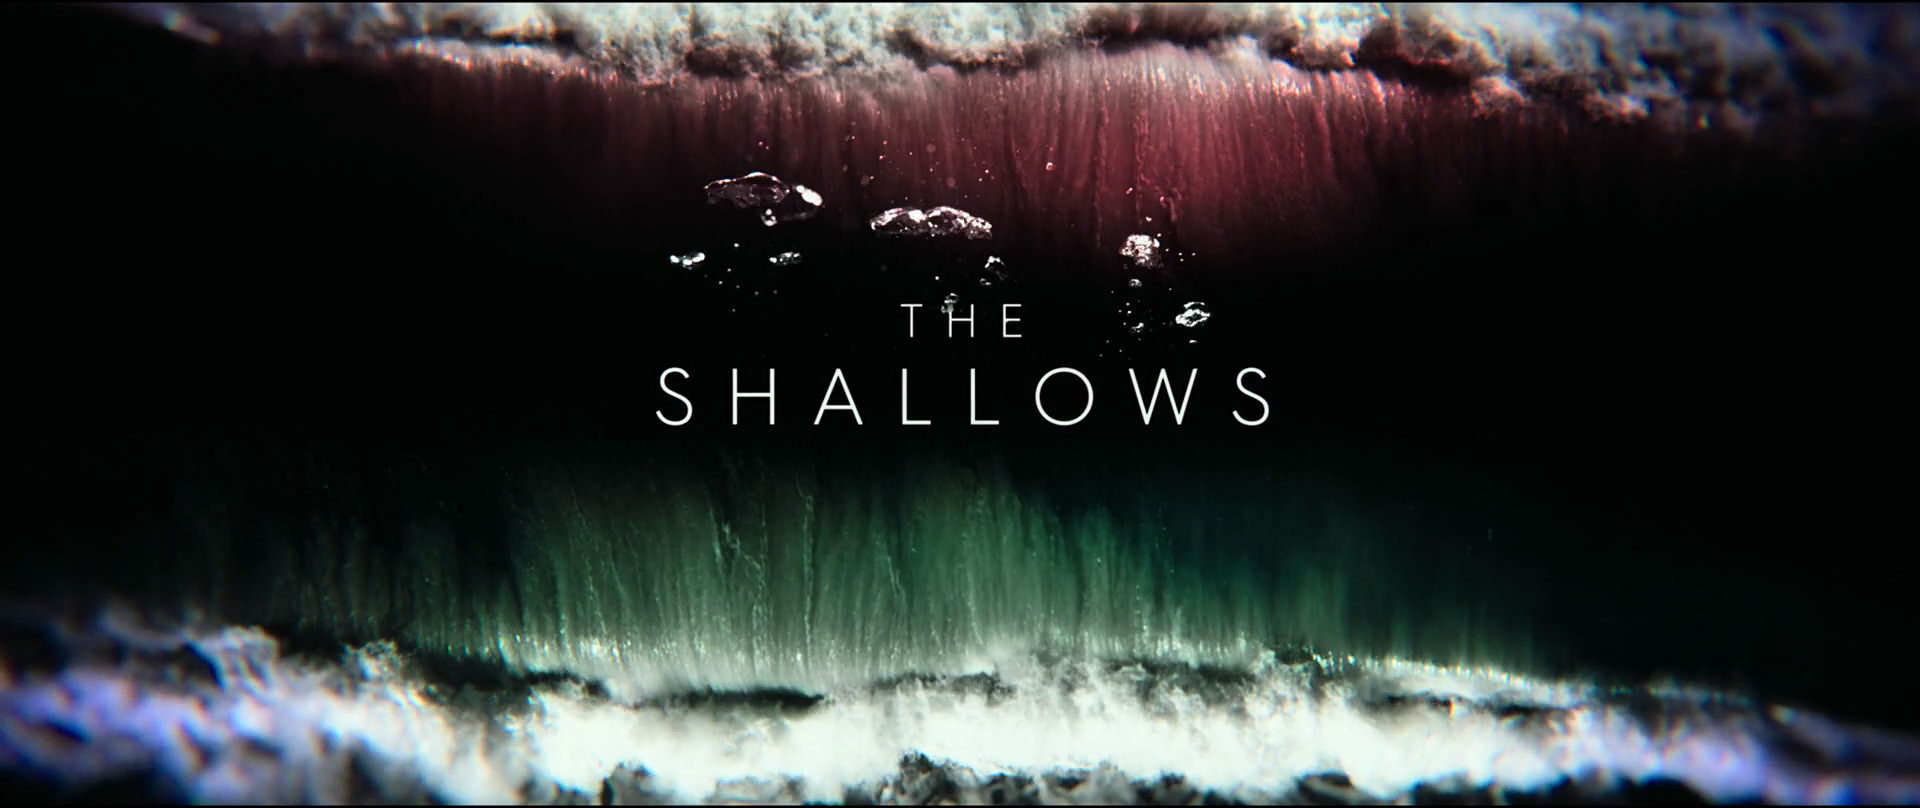 the shallows full movie with subtitles